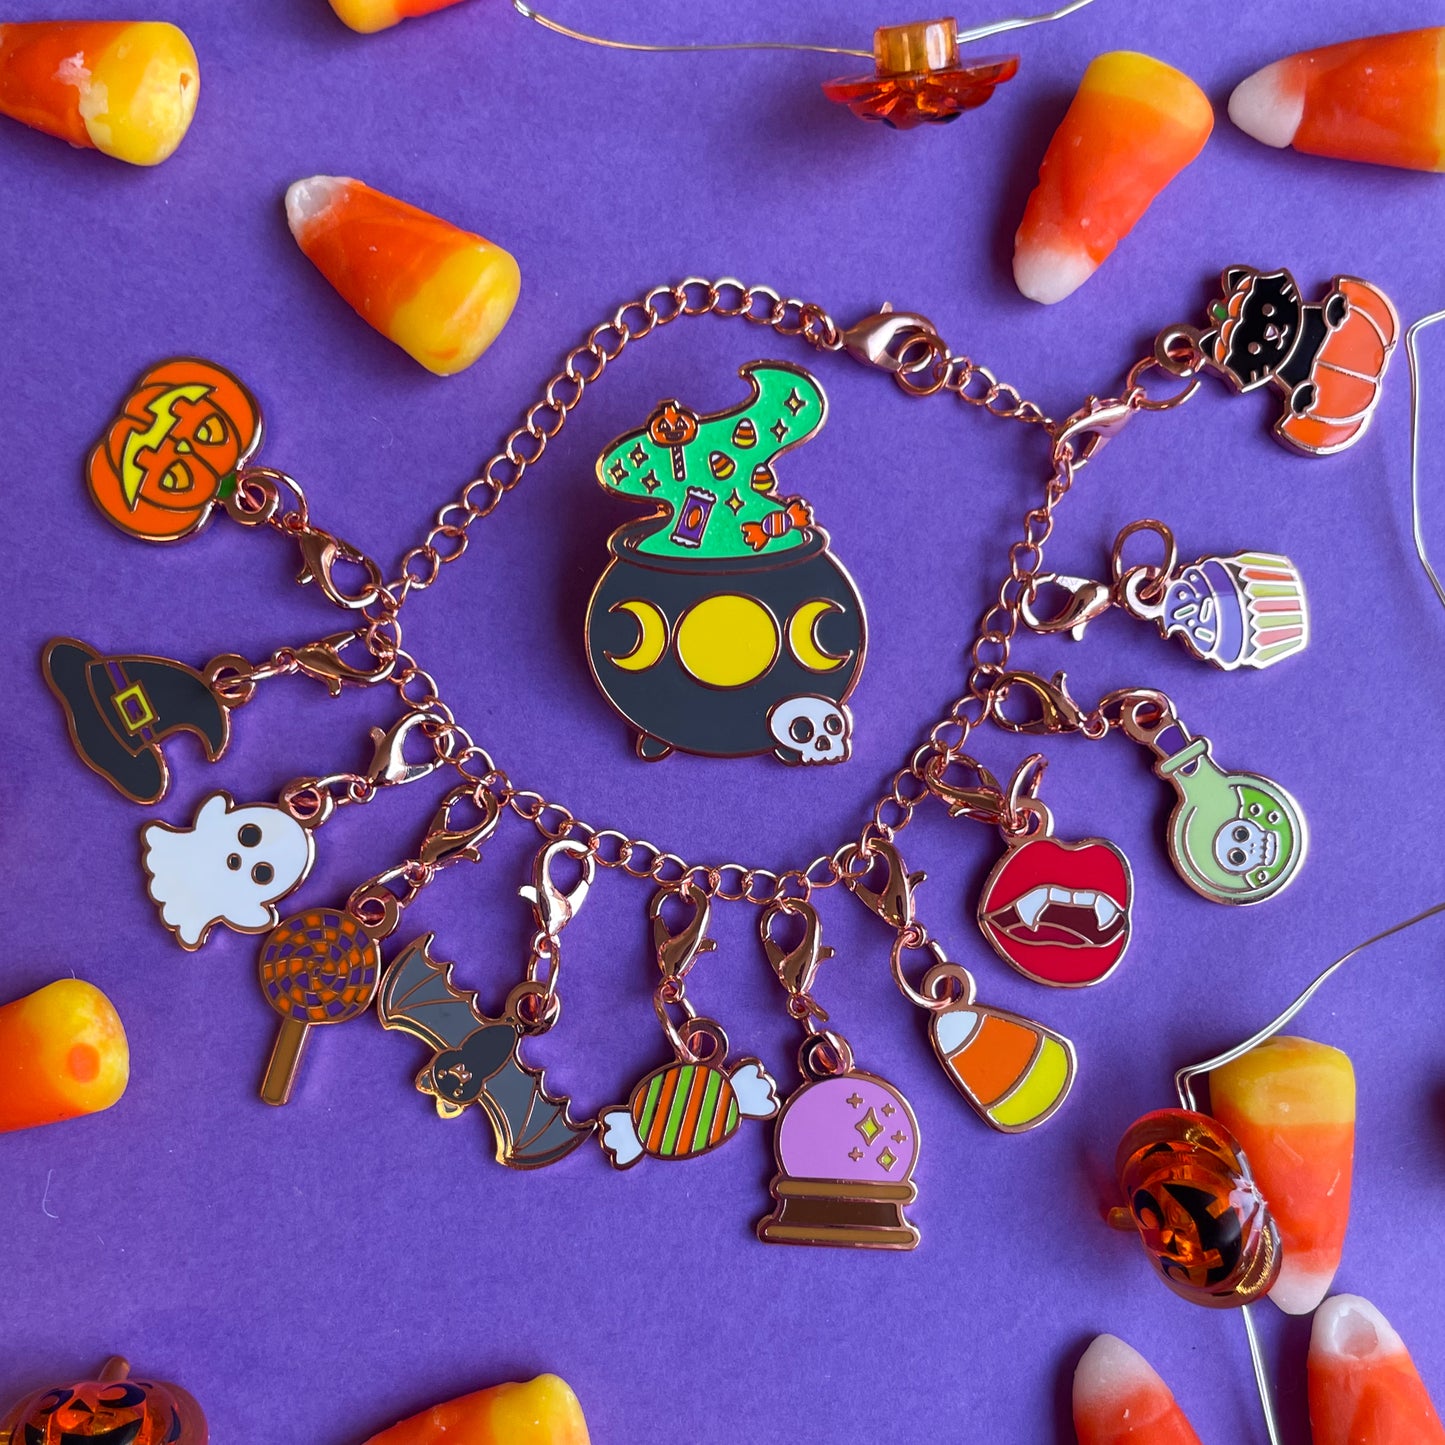 A charm bracelet with 12 Halloween themed charms on it and an enamel pin of a cauldron in the center of the bracelet.